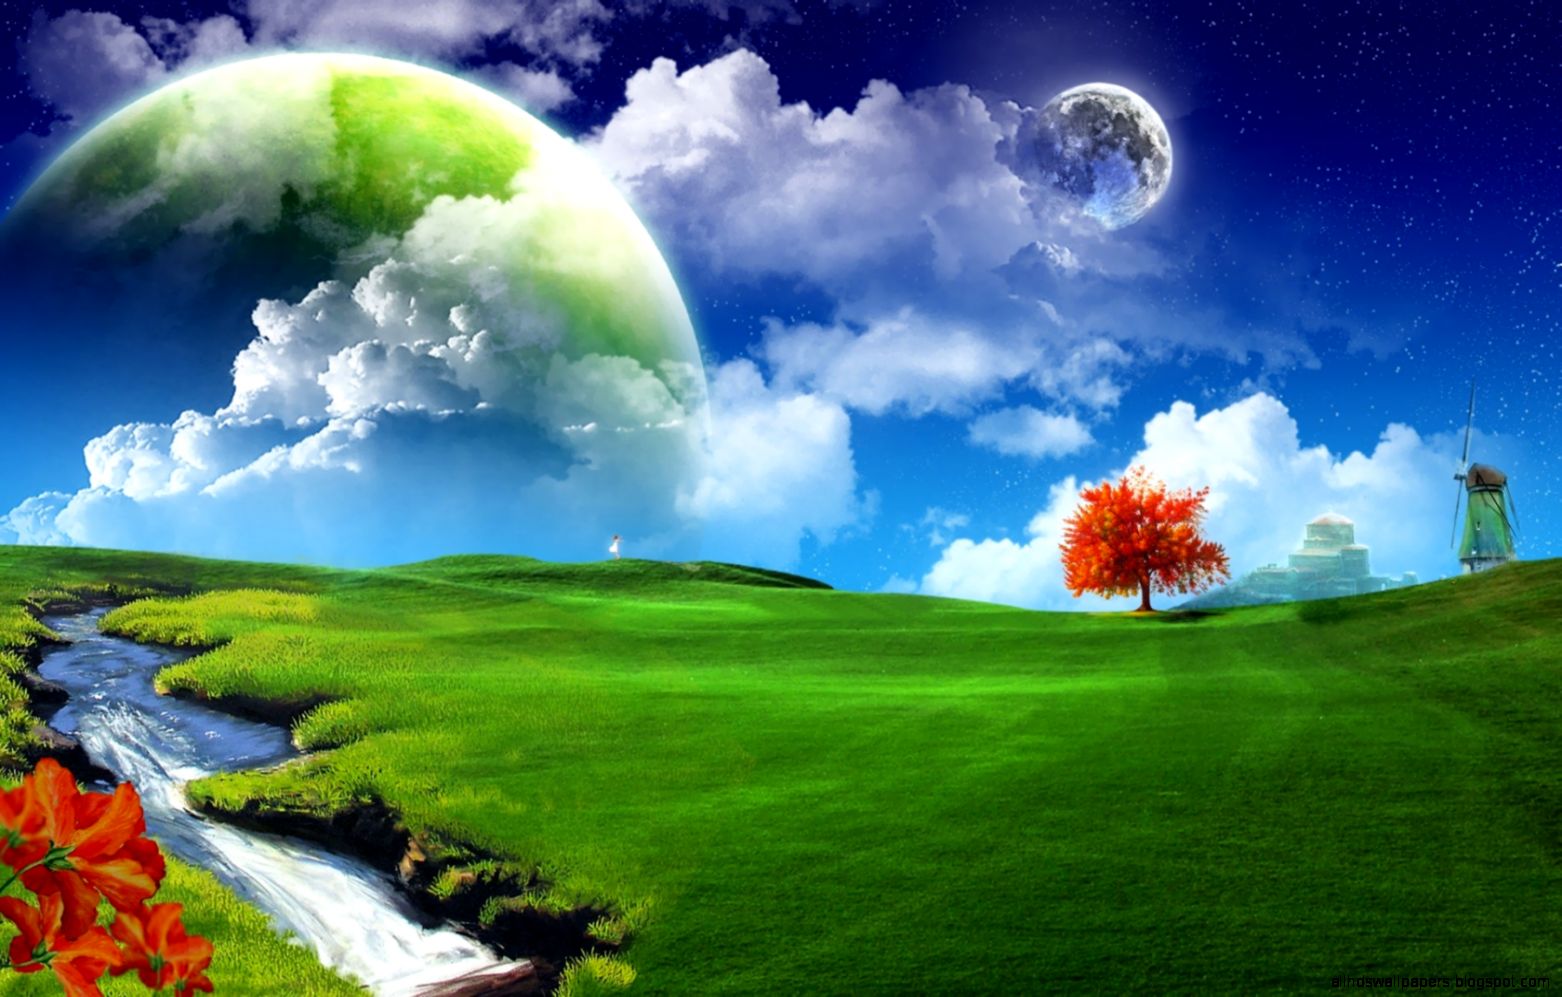 Landscape Backgrounds For Photoshop | All HD Wallpapers